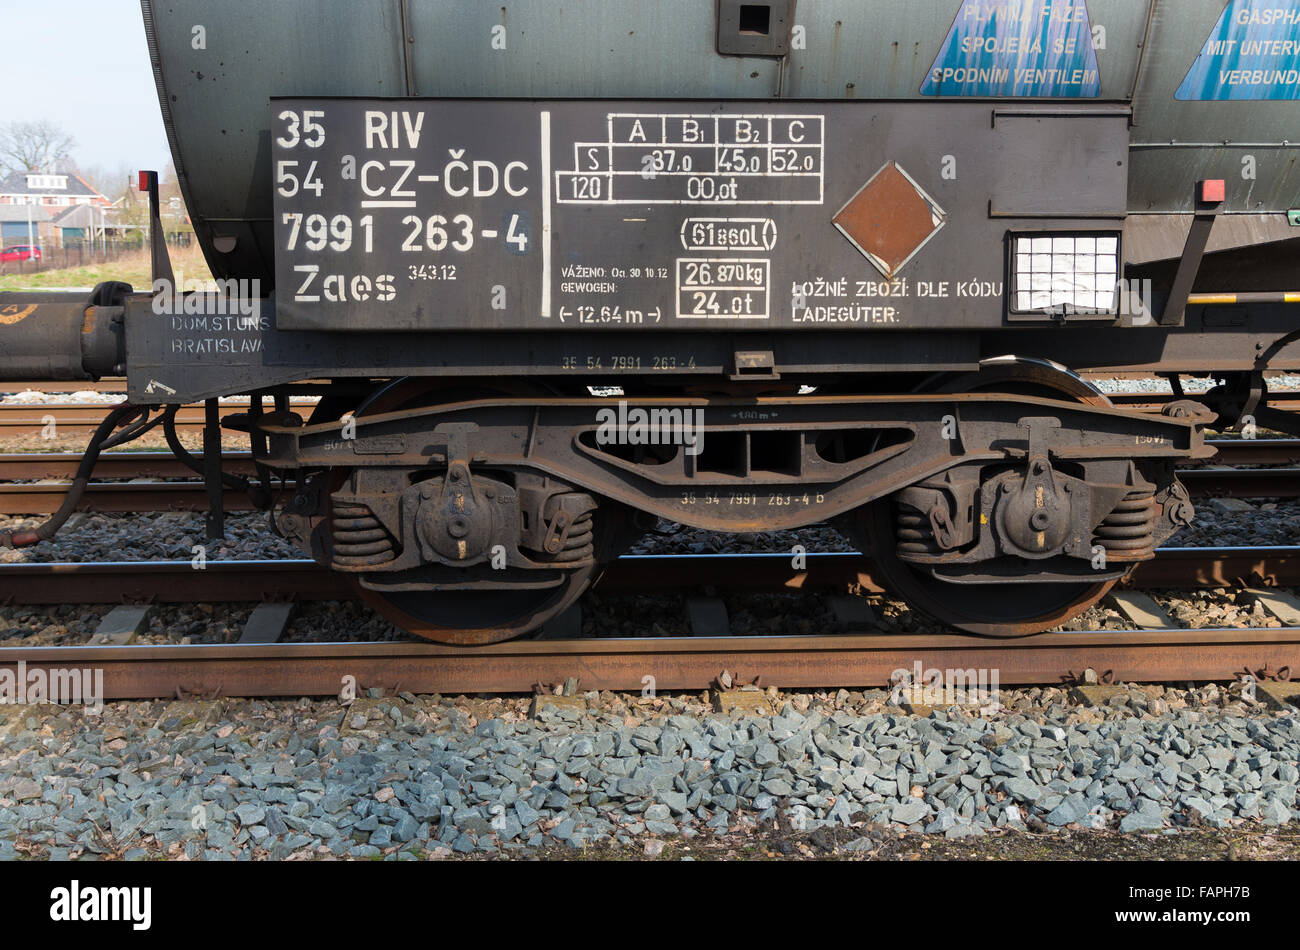 OLDENZAAL, NETHERLANDS - MARCH 23, 2015: Closeup of the wheels of a cargo train waggon waiting on the Oldenzaal train station Stock Photo